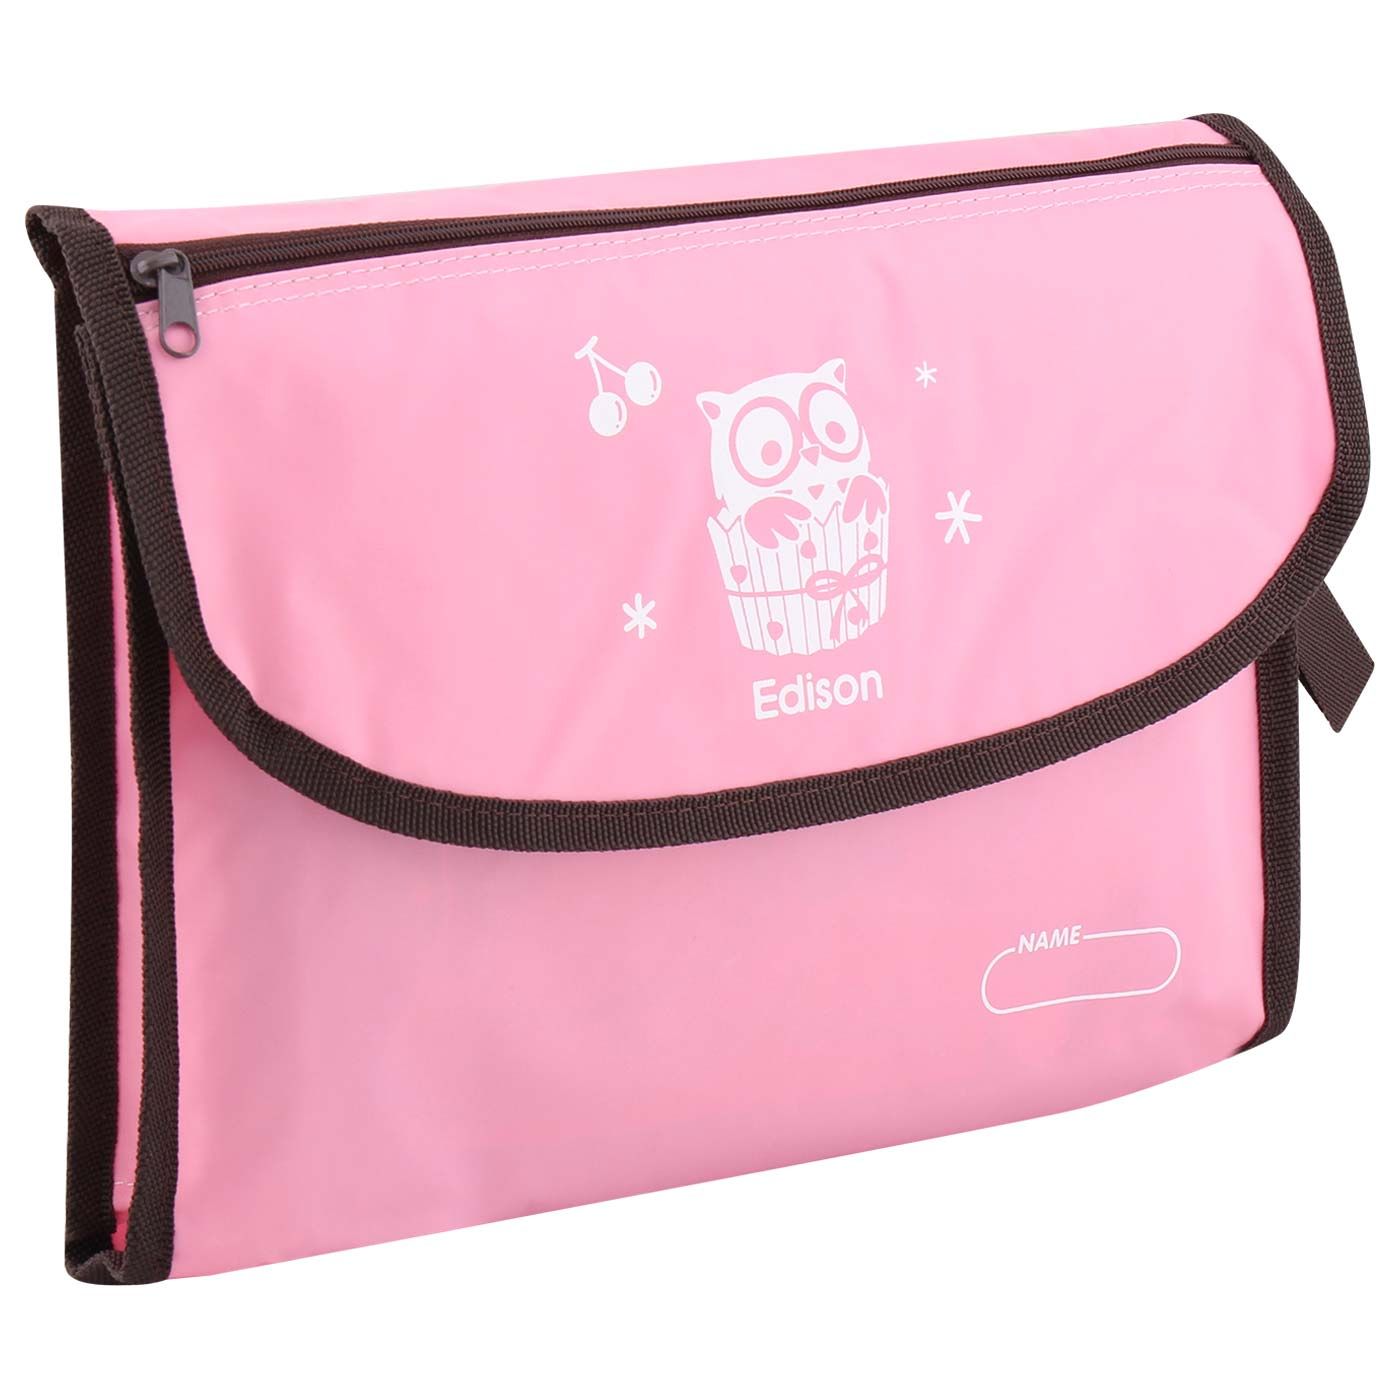 Edison Stainless Lunch Box With Pouch Pink - 3